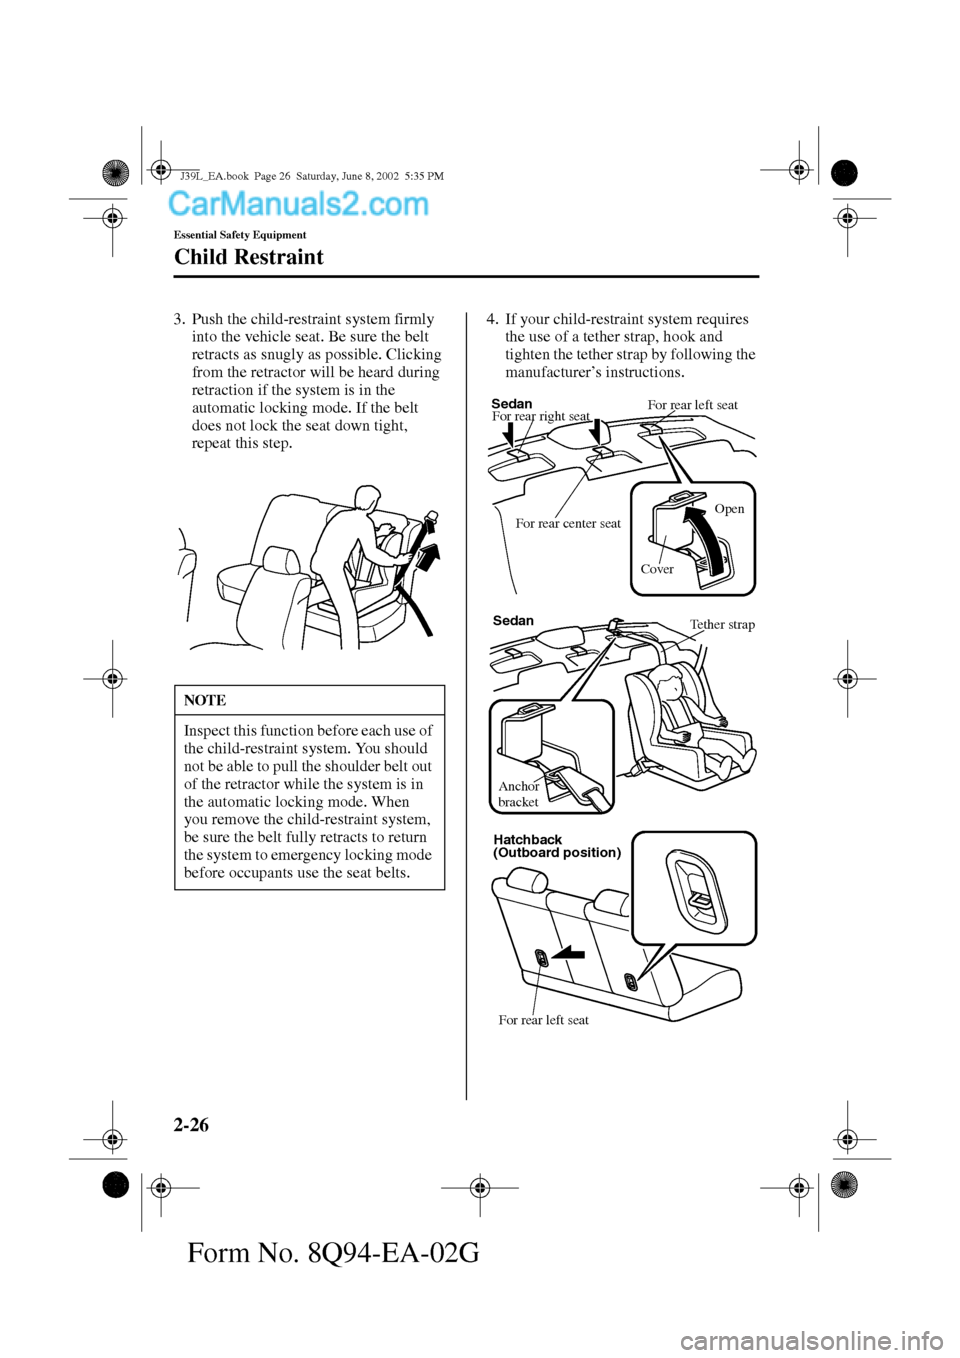 MAZDA MODEL PROTÉGÉ 2003   (in English) Owners Guide 2-26
Essential Safety Equipment
Child Restraint
Form No. 8Q94-EA-02G
3. Push the child-restraint system firmly 
into the vehicle seat. Be sure the belt 
retracts as snugly as possible. Clicking 
from 